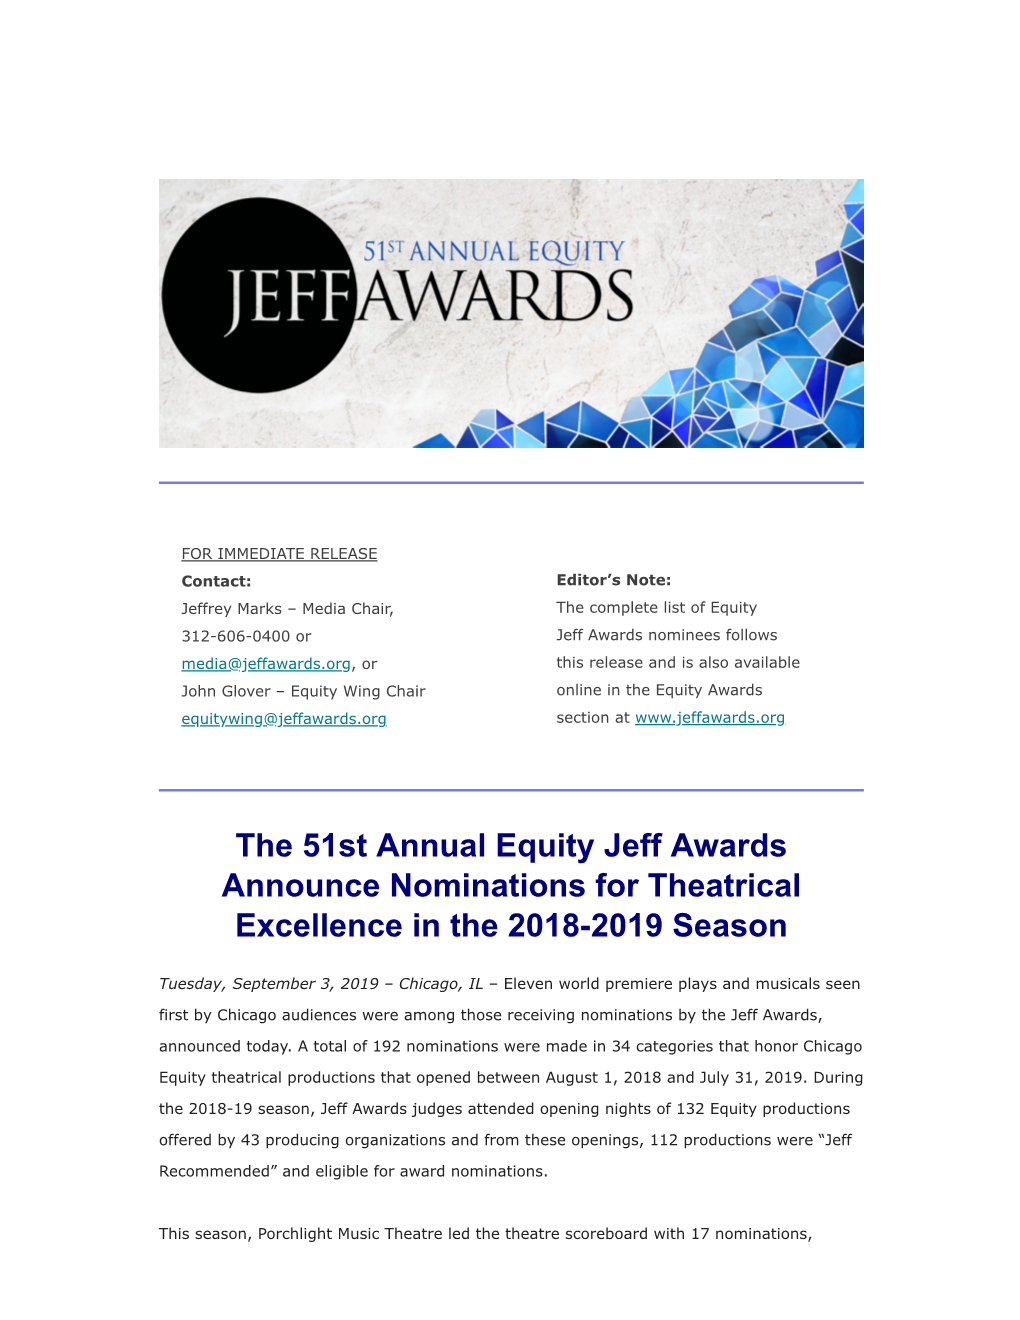 The 51St Annual Equity Jeff Awards Announce Nominations for Theatrical Excellence in the 2018-2019 Season